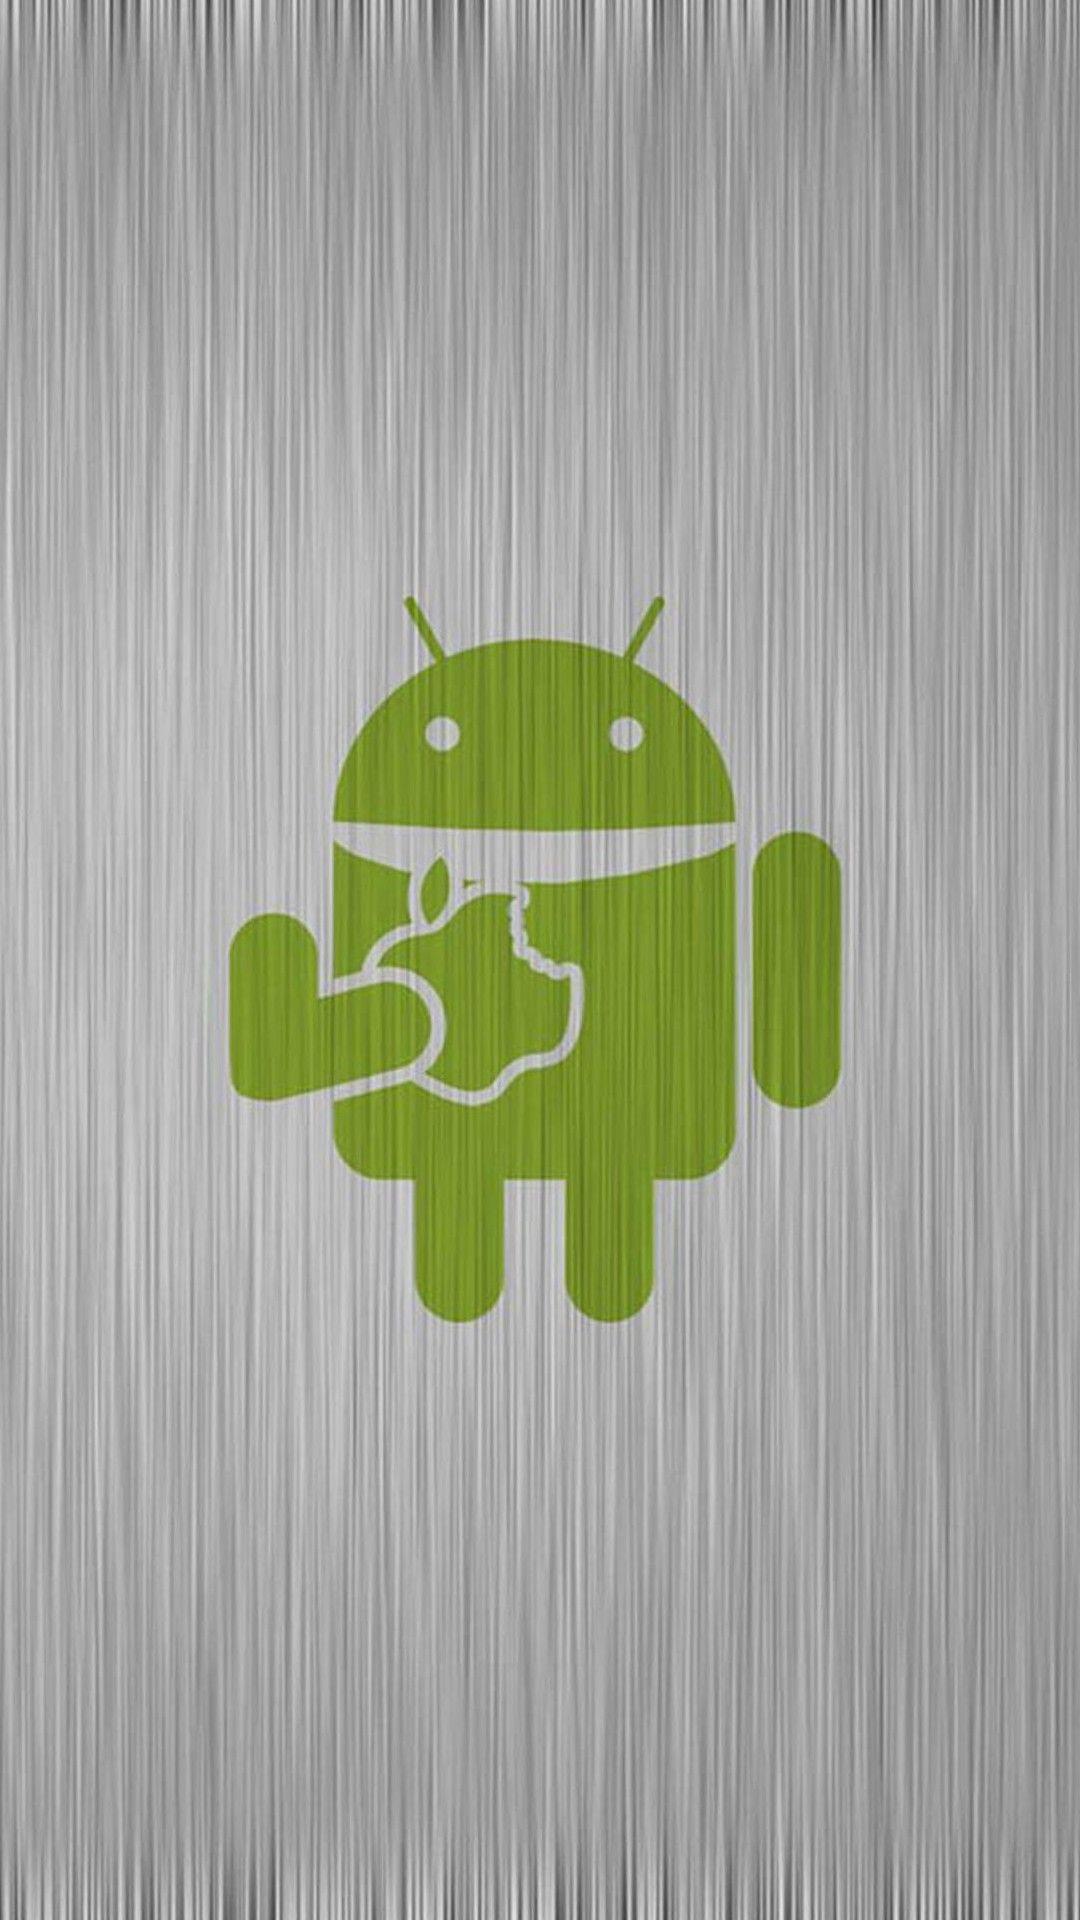 Android eating apple htc one wallpaper, free and easy to